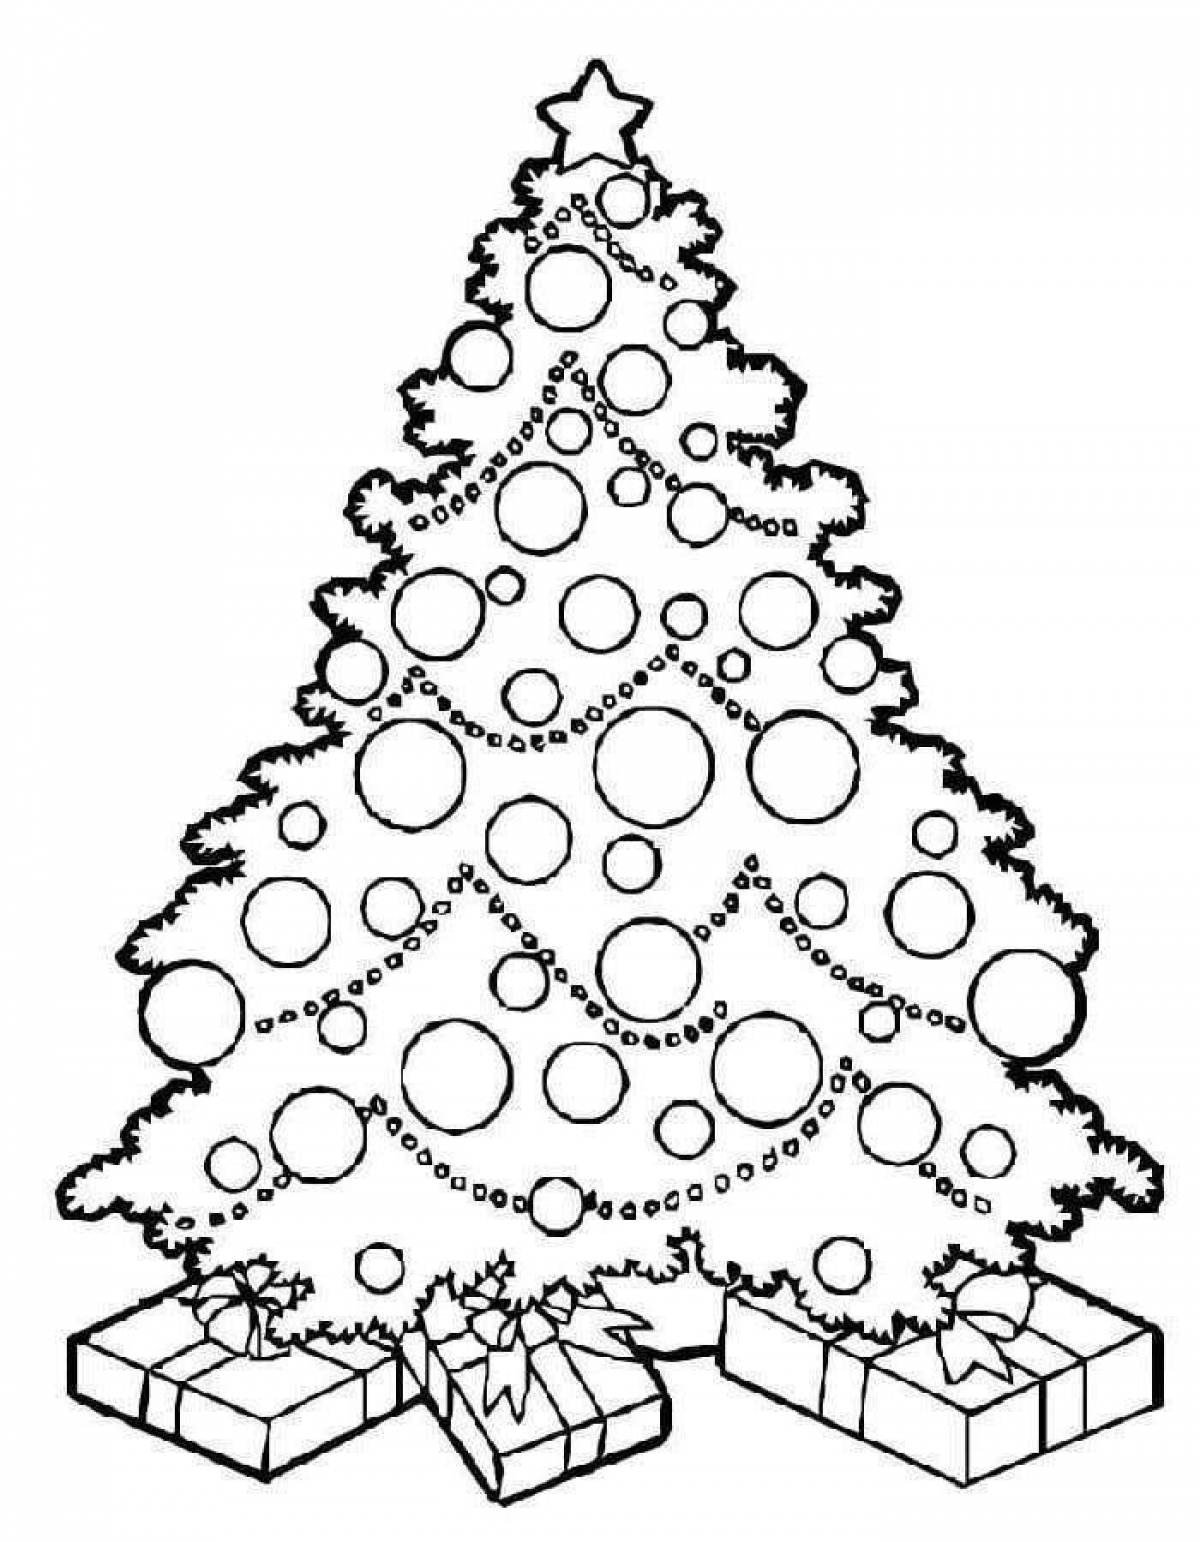 Sparkling Christmas tree coloring book